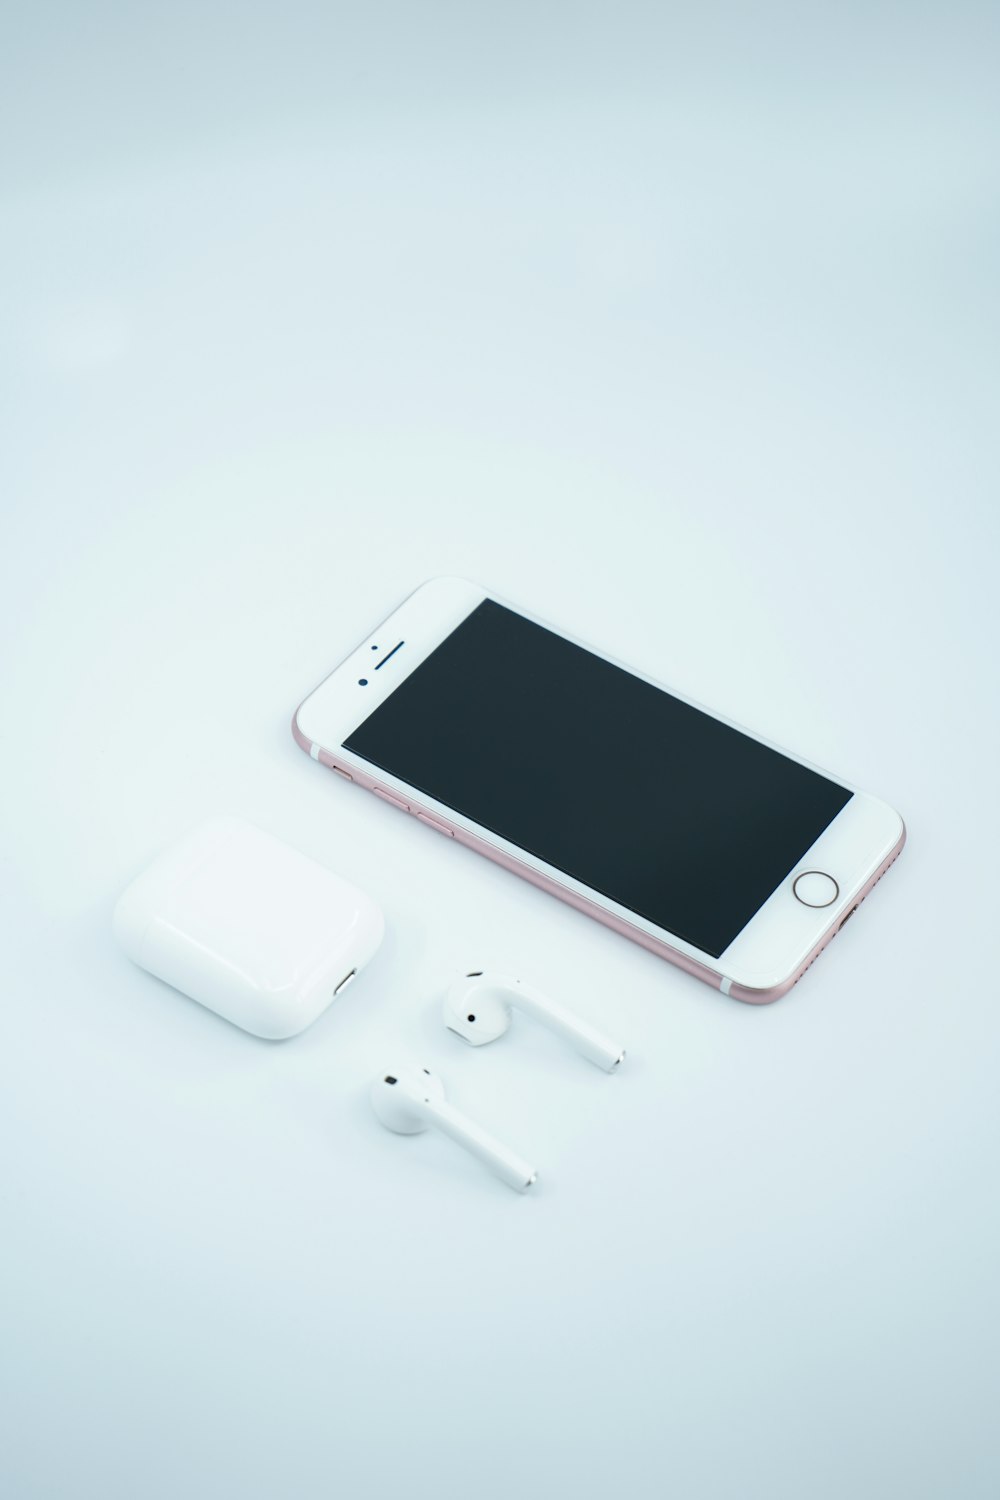 white iphone 5 c beside white earbuds